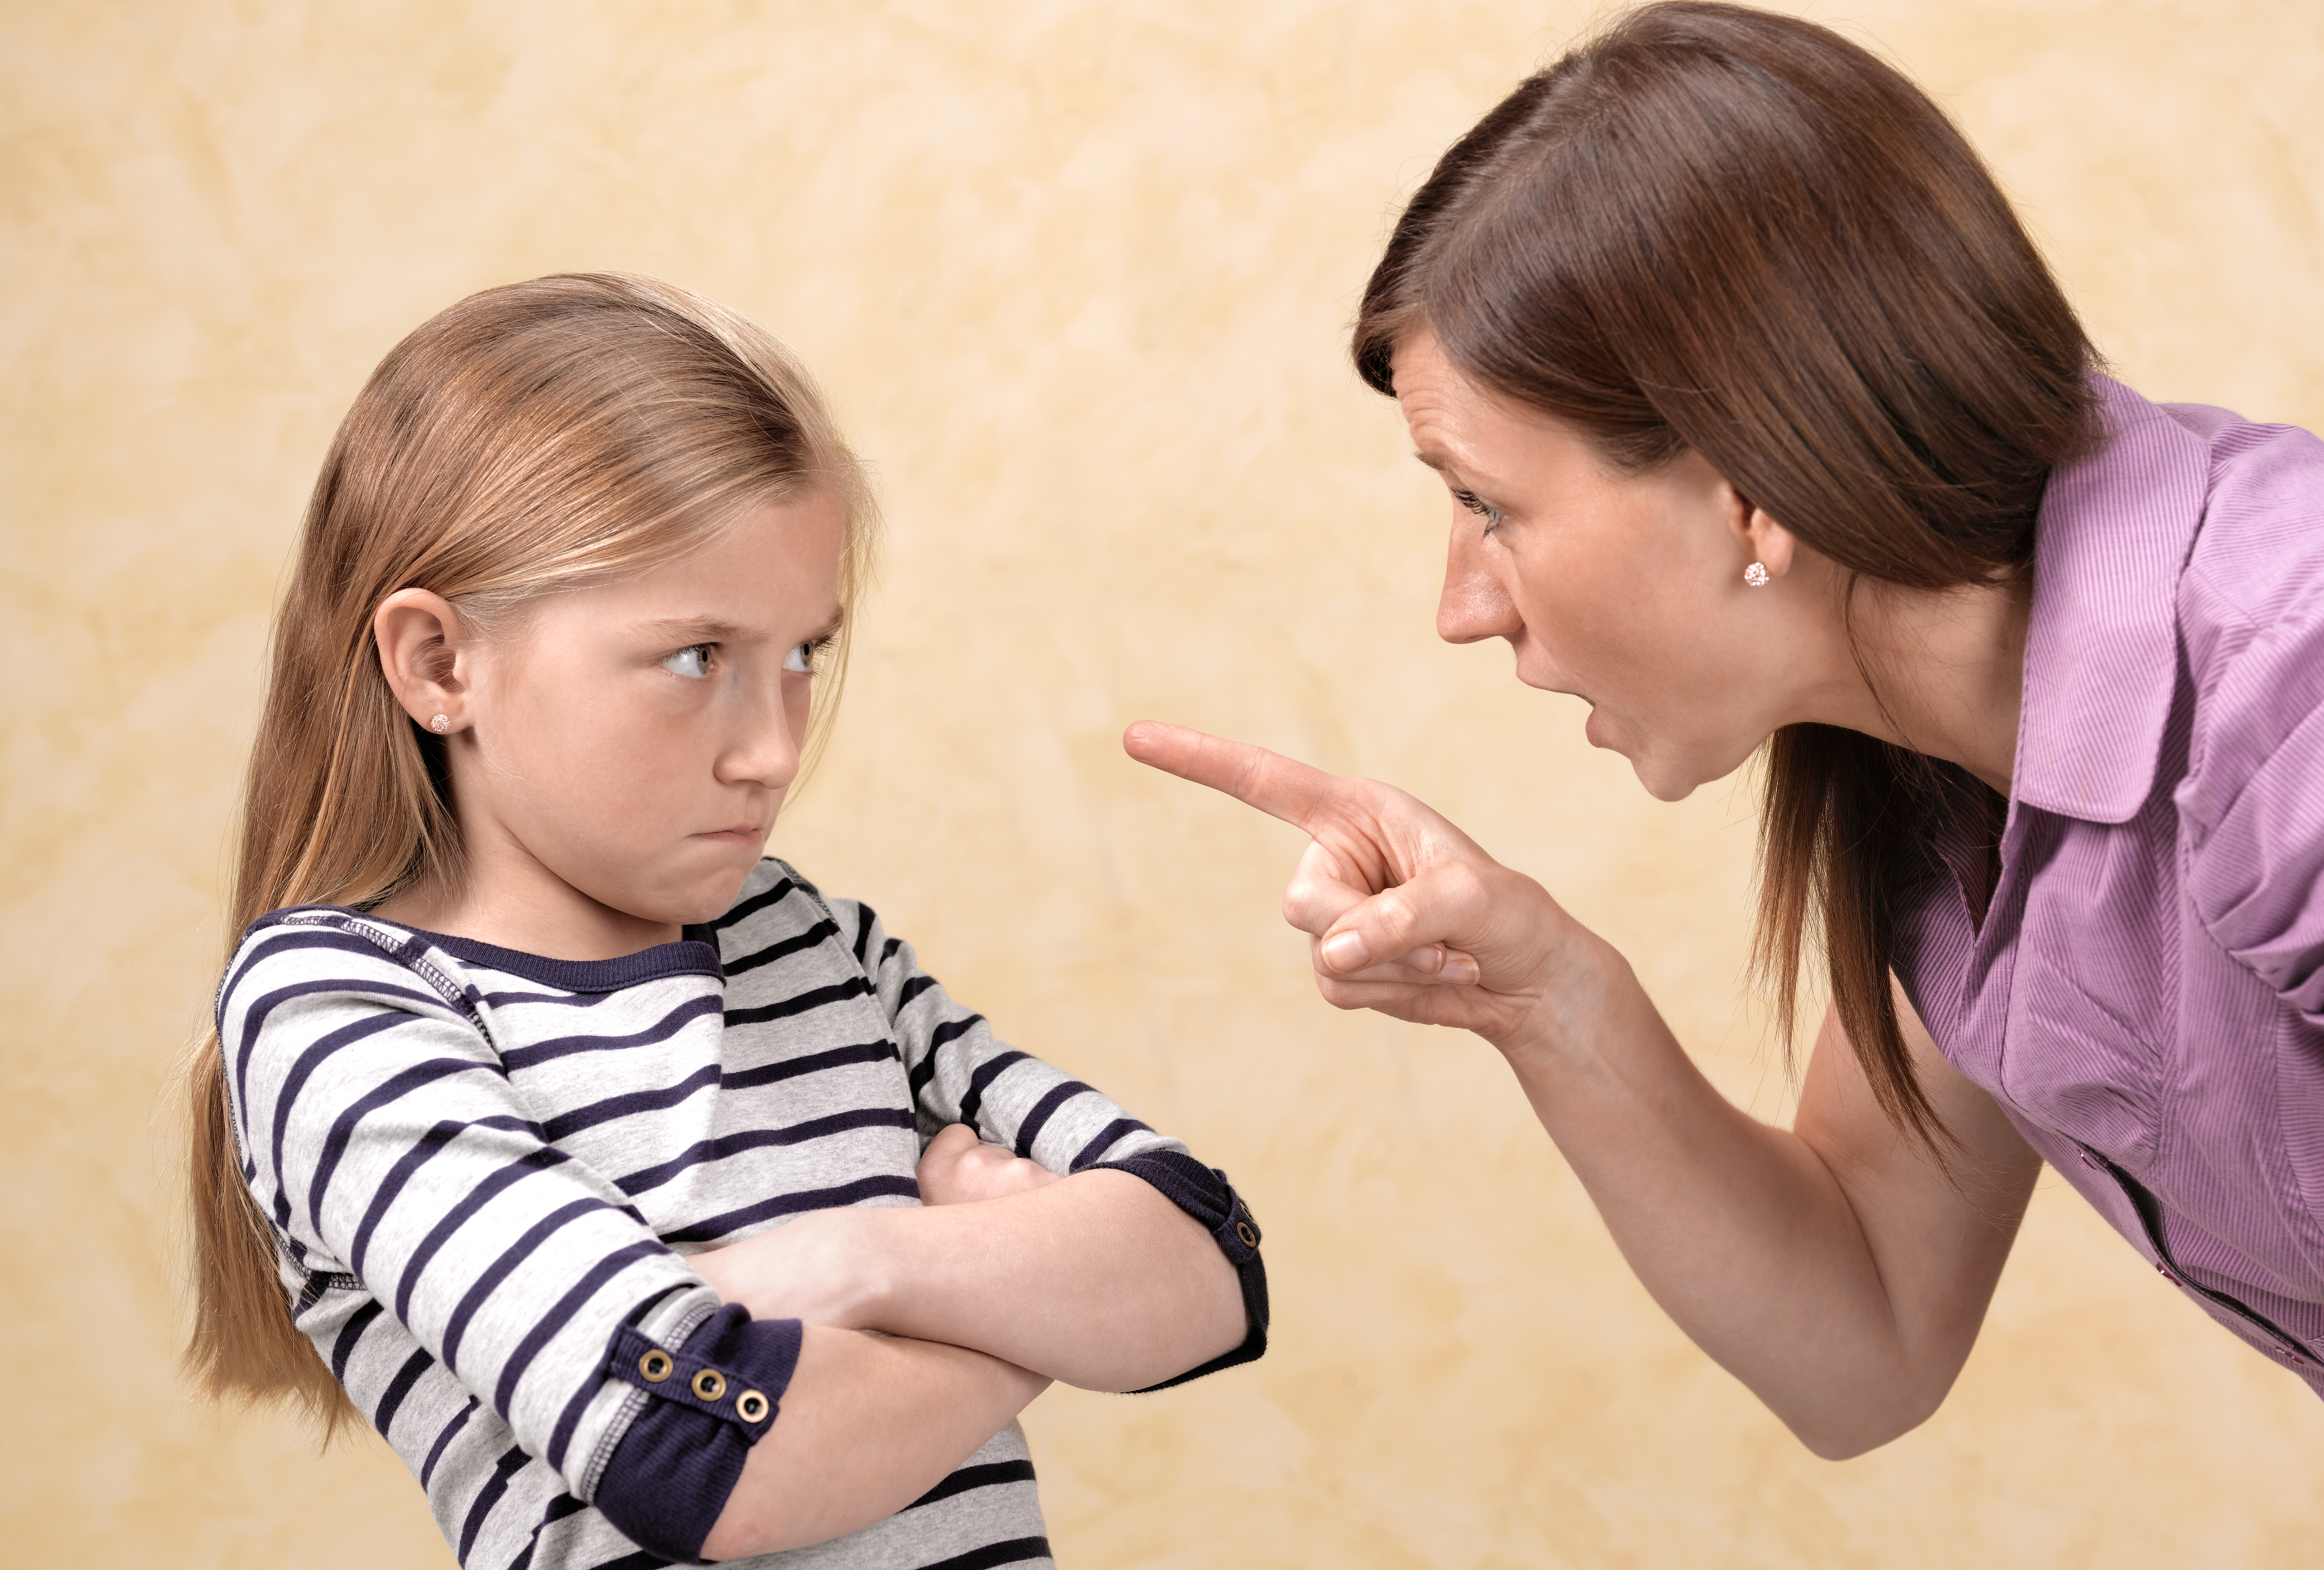 A woman yelling at a young girl | Source: Getty Images